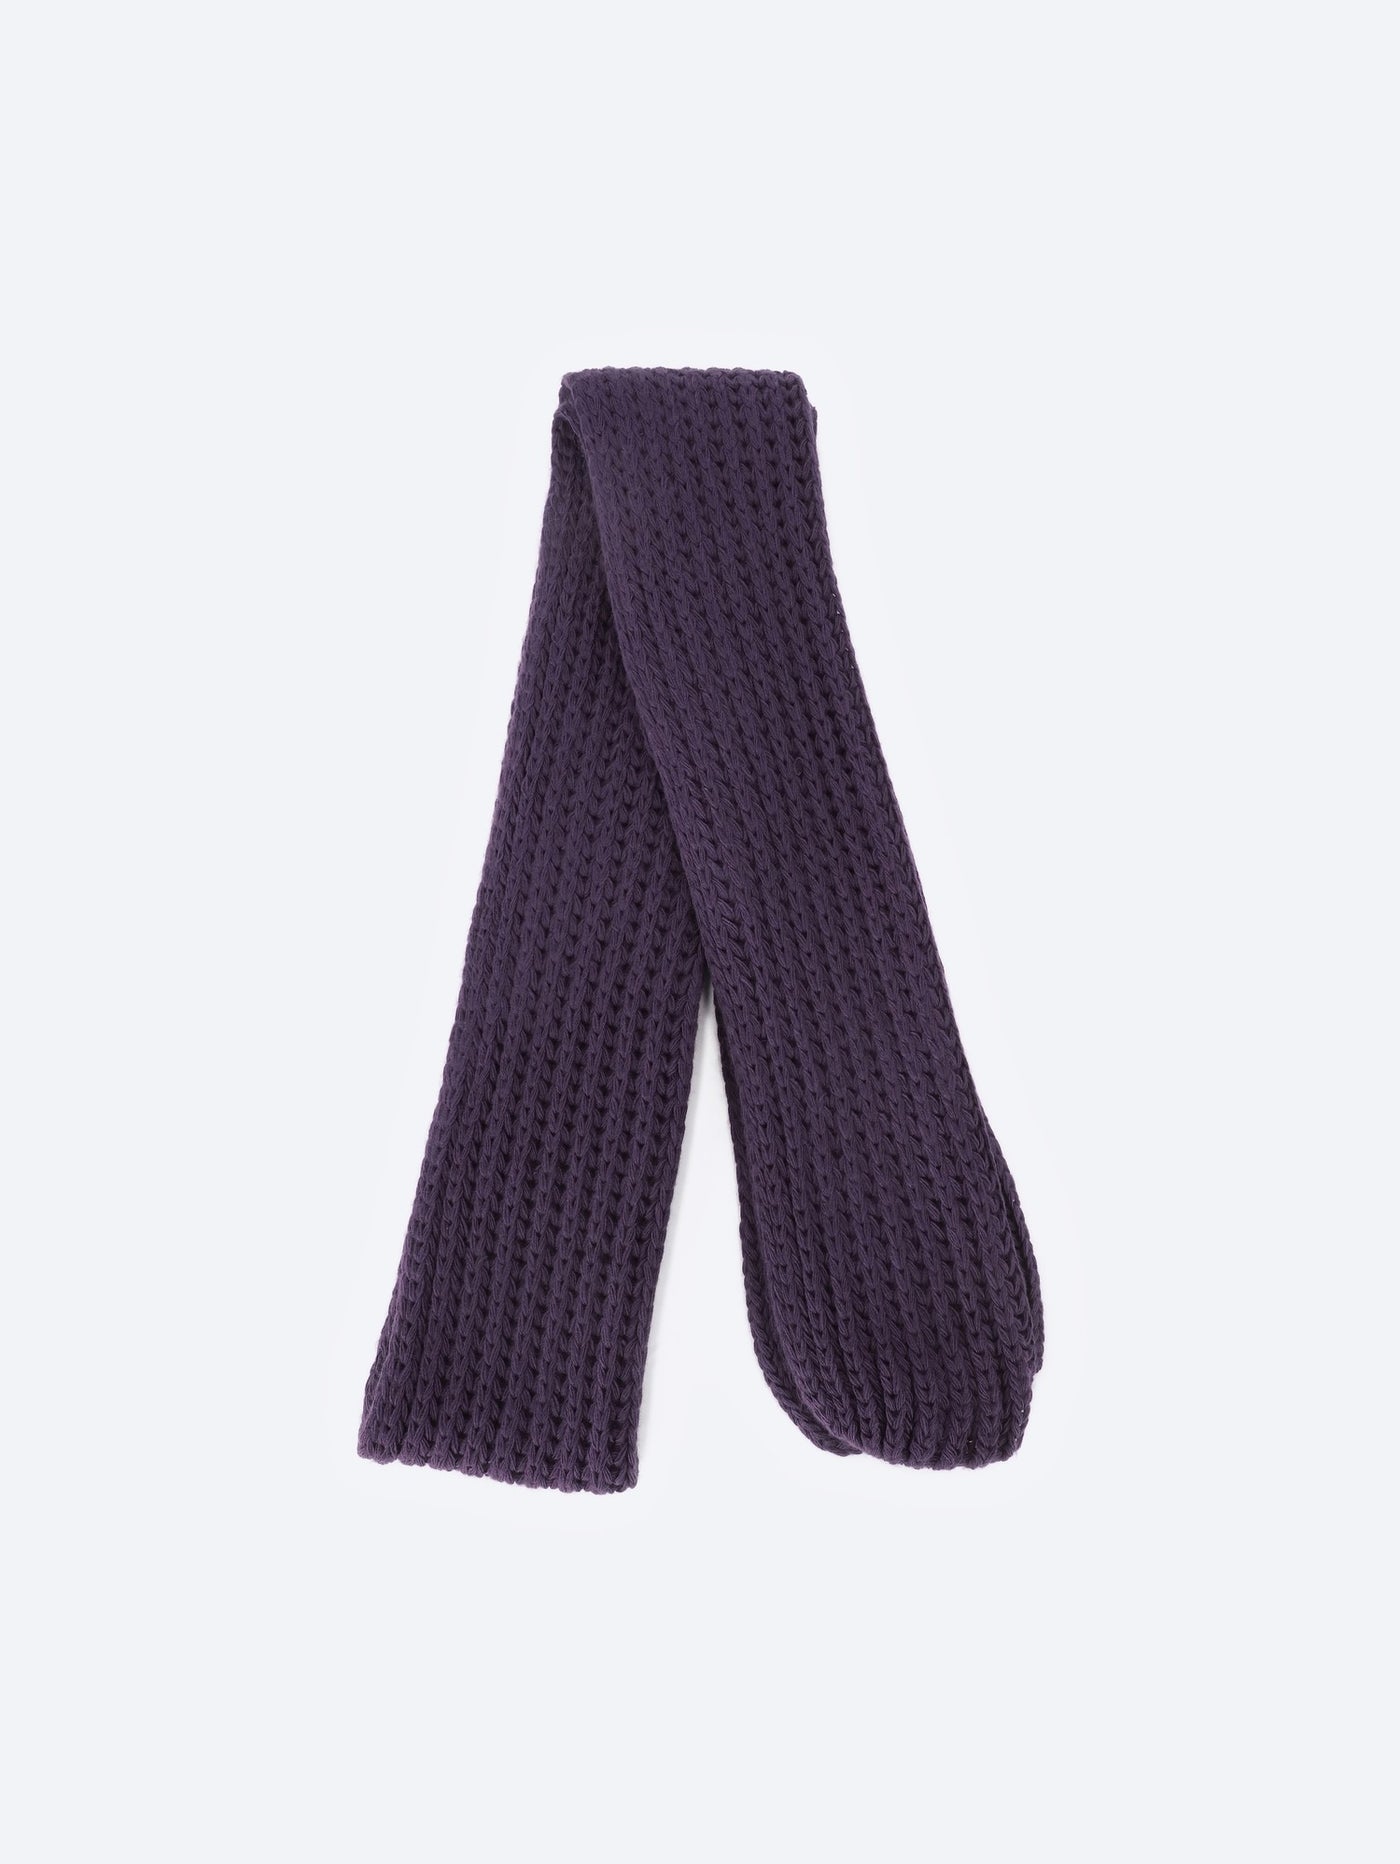 Scarf - Knitted